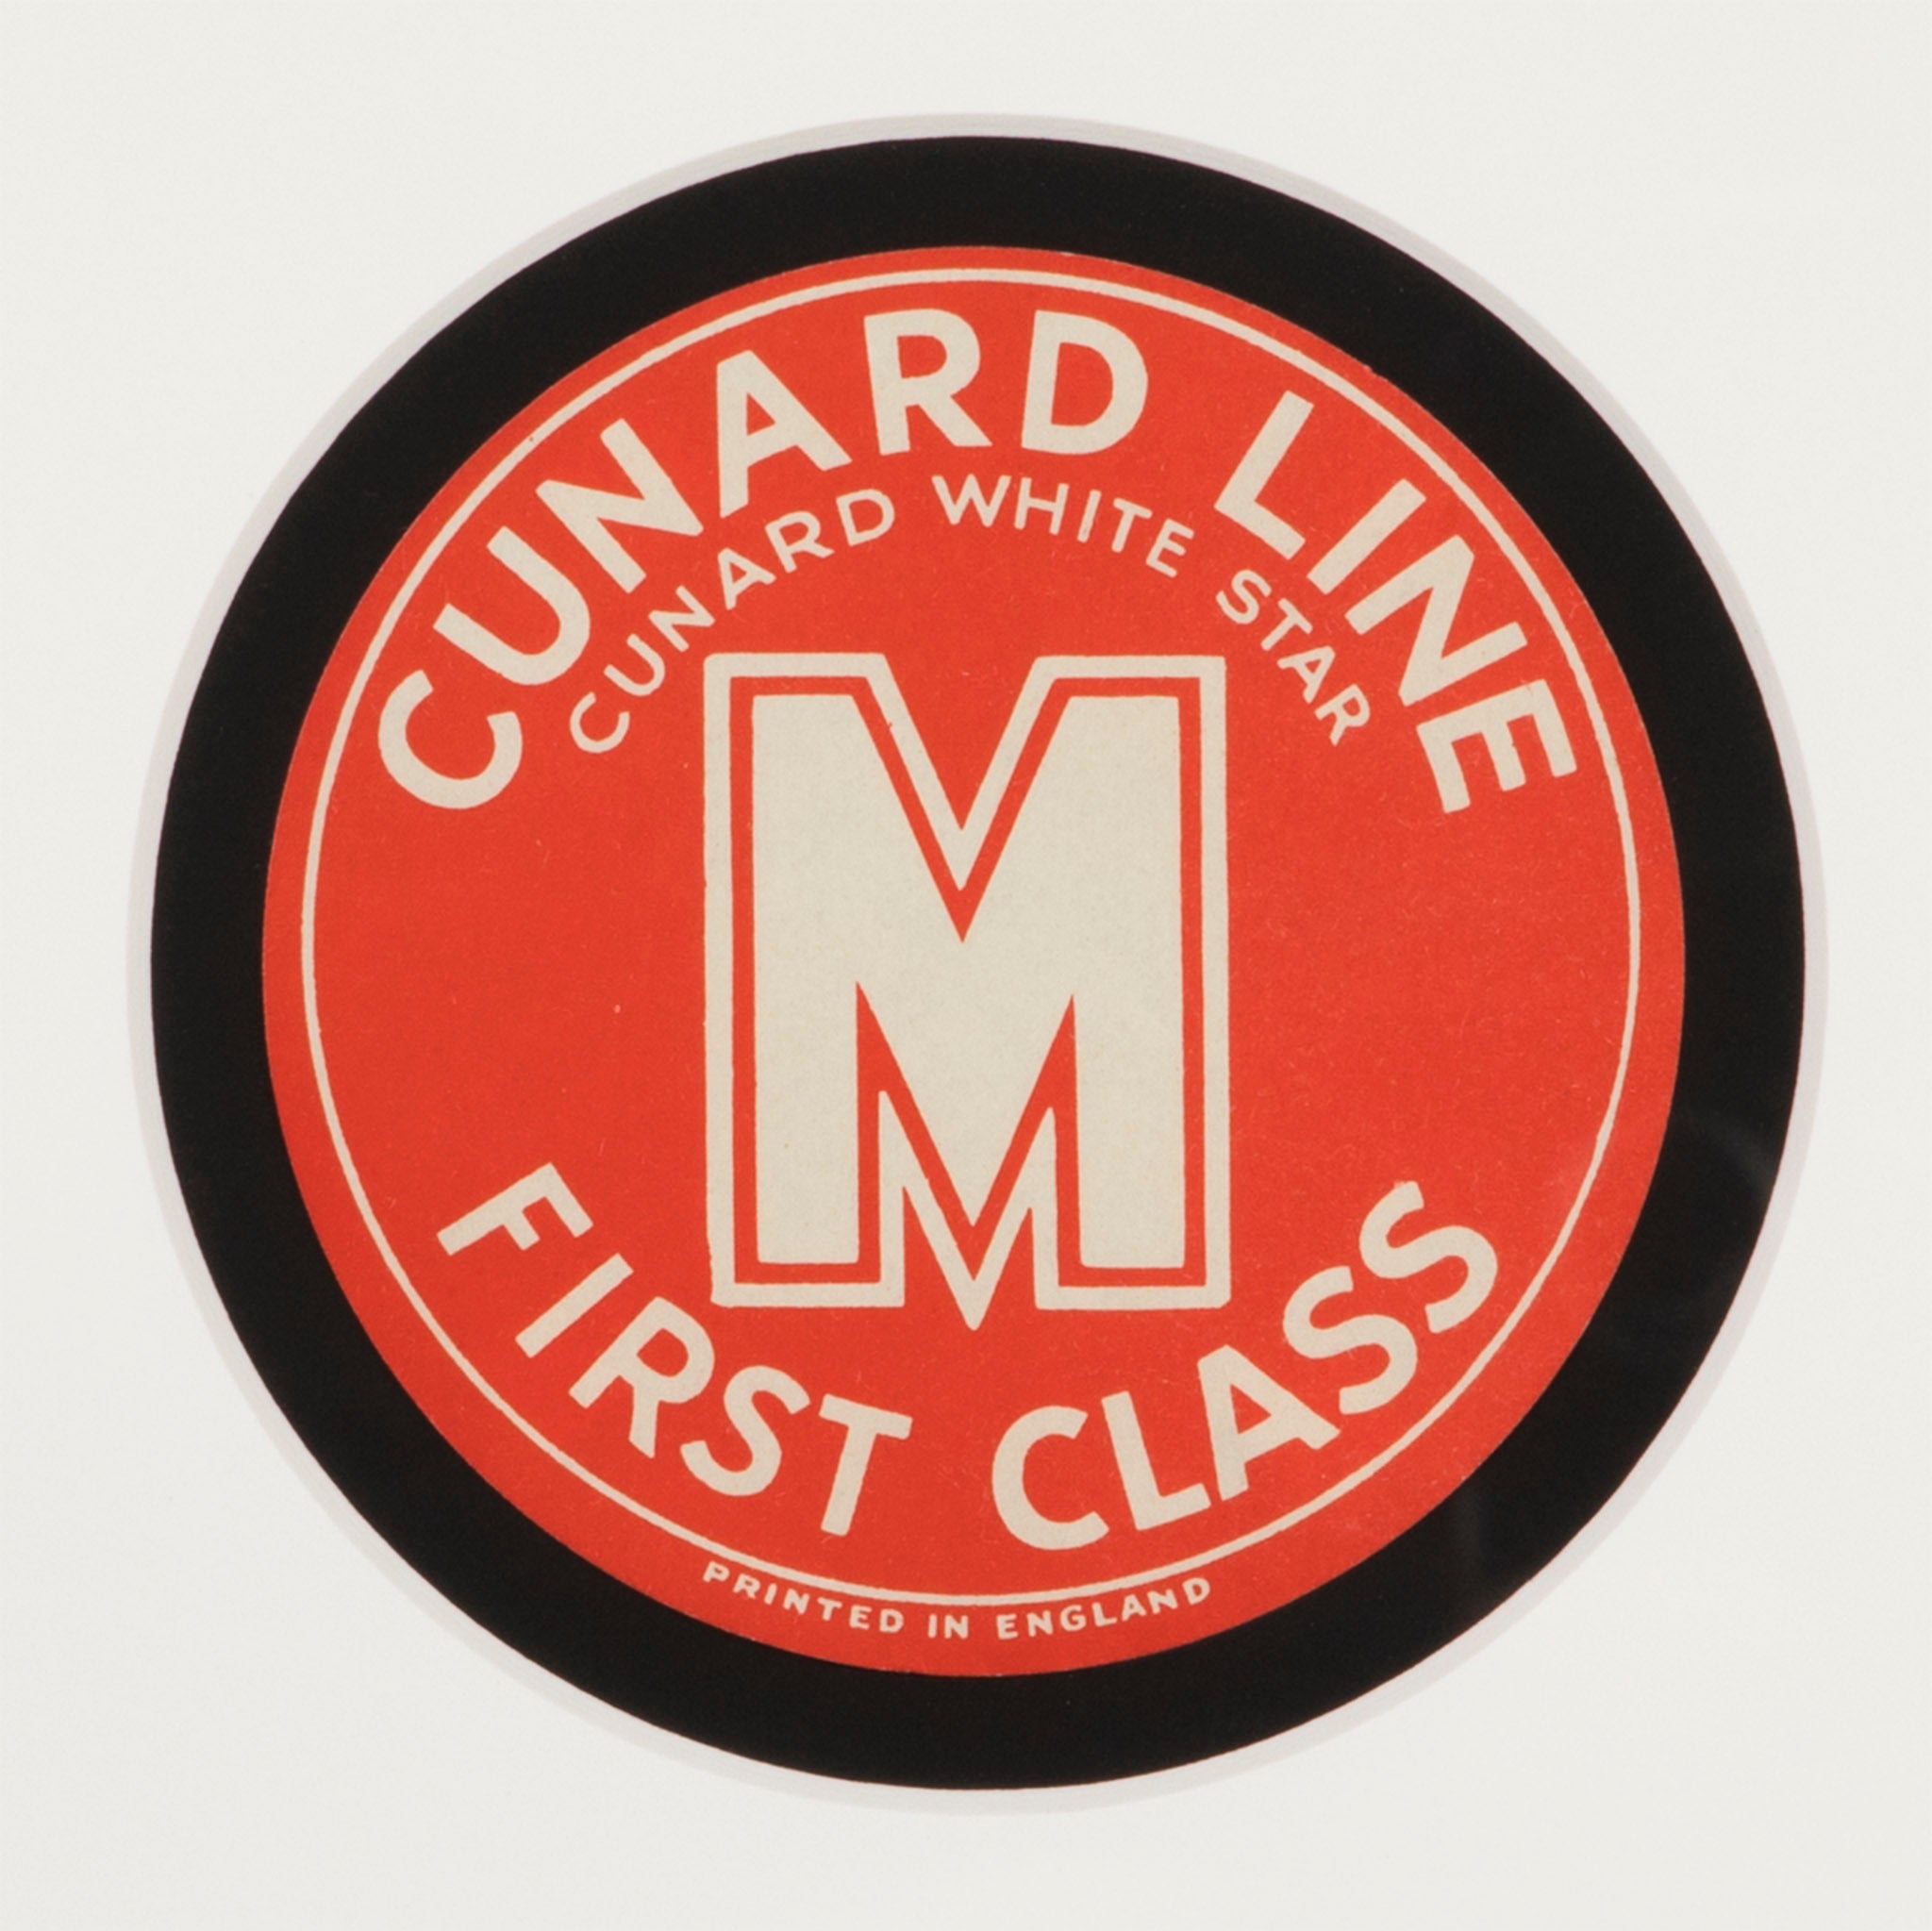 Curnard White Star Line First Class Luggage Label